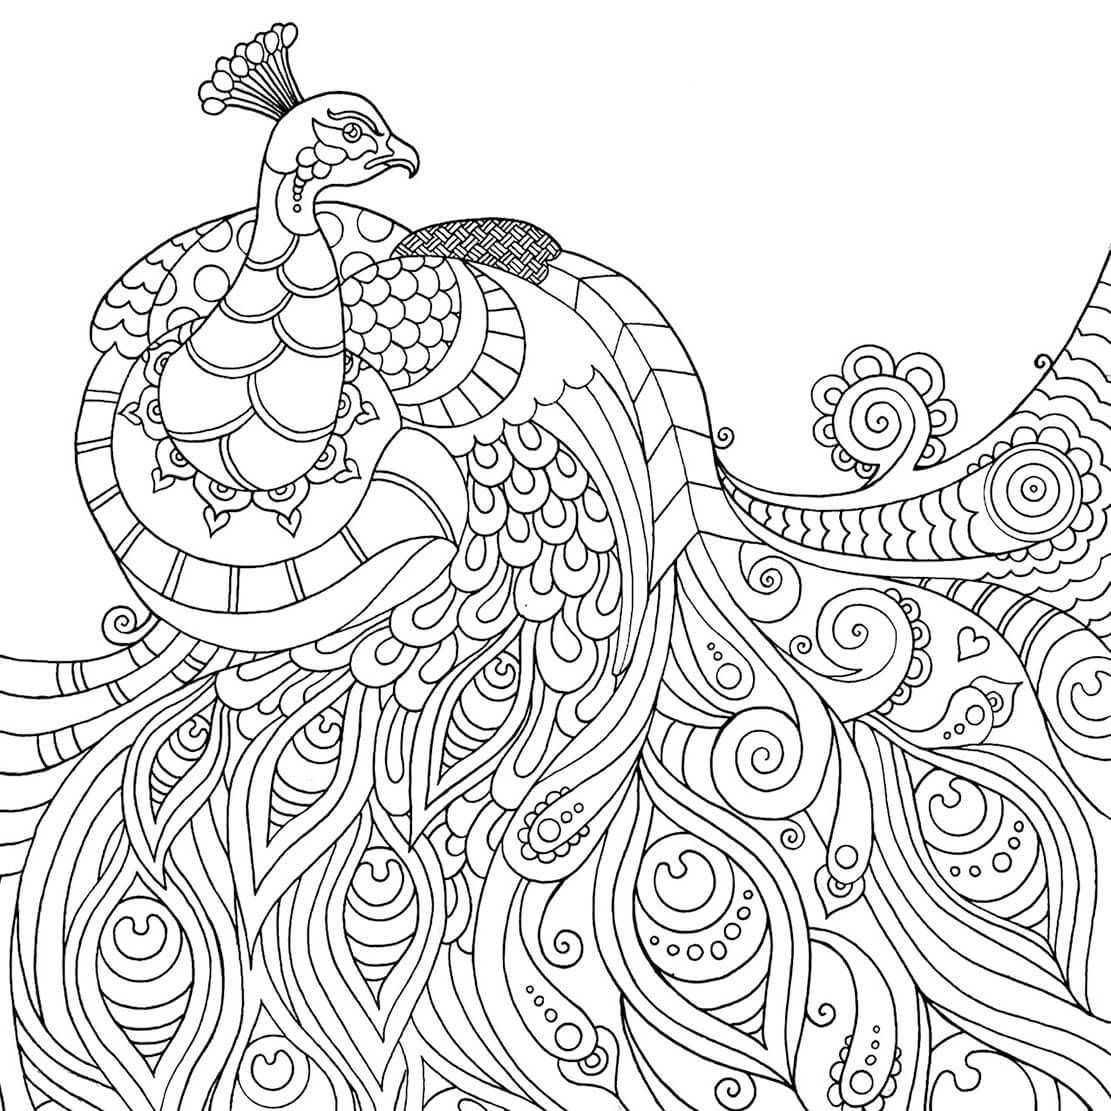 Peacock Mindfulness For Kids Coloring Page